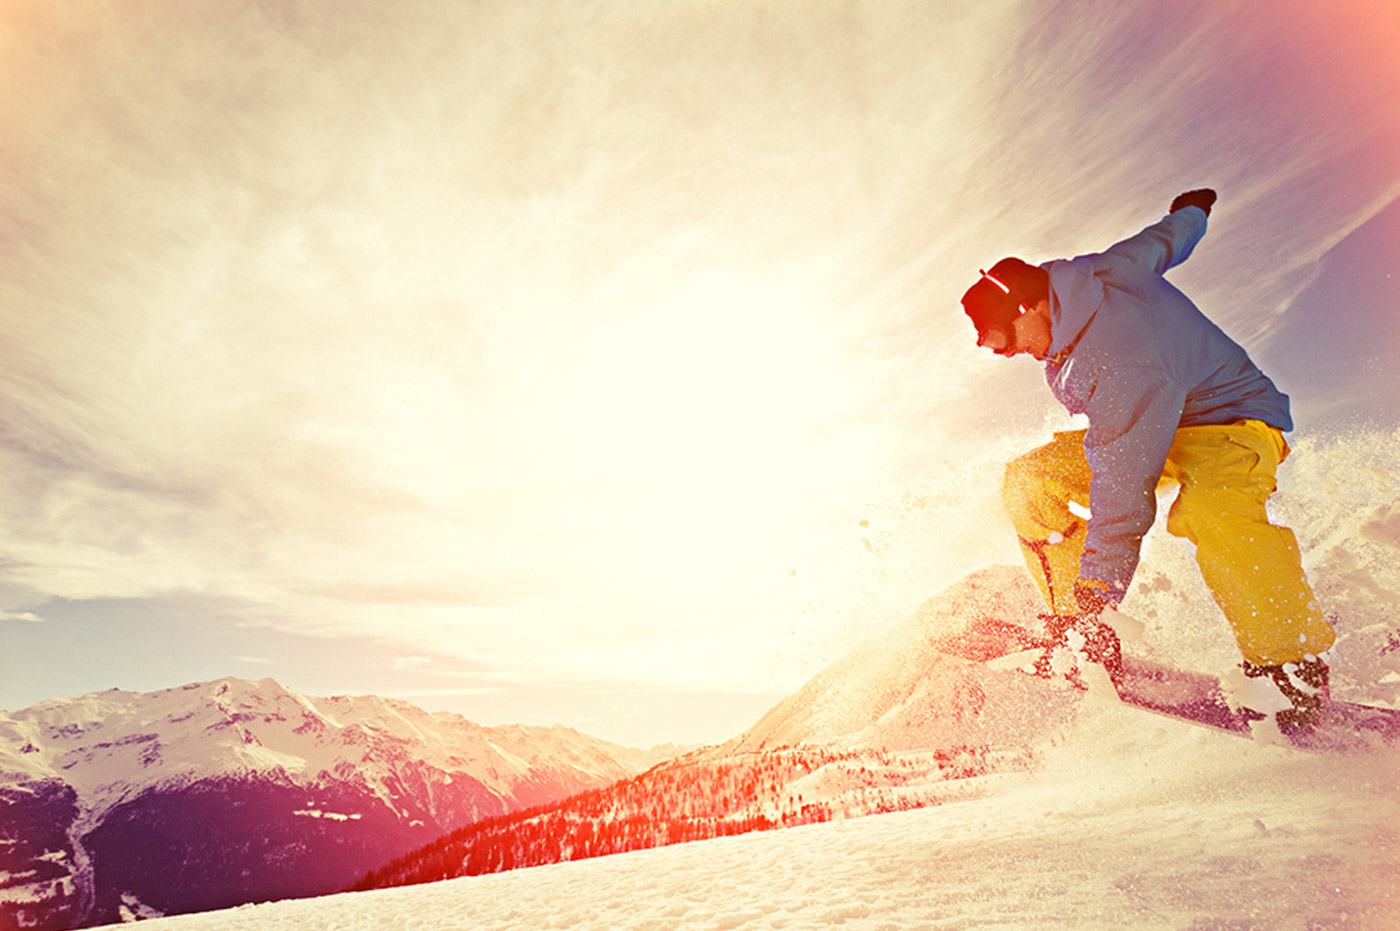 A man snowboarding in the mountains with the sunset in the background.